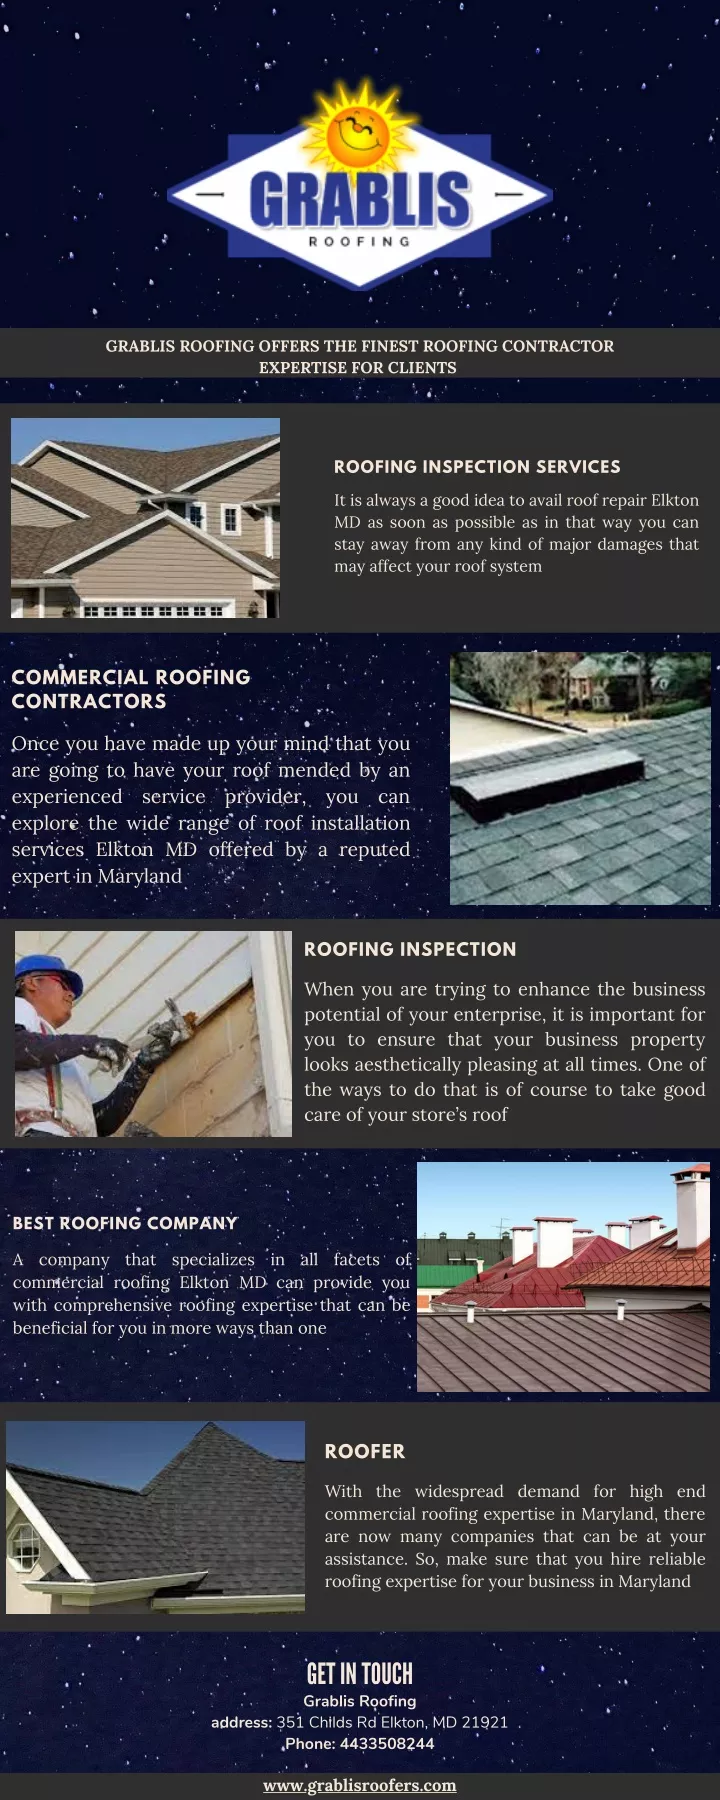 grablis roofing offers the finest roofing